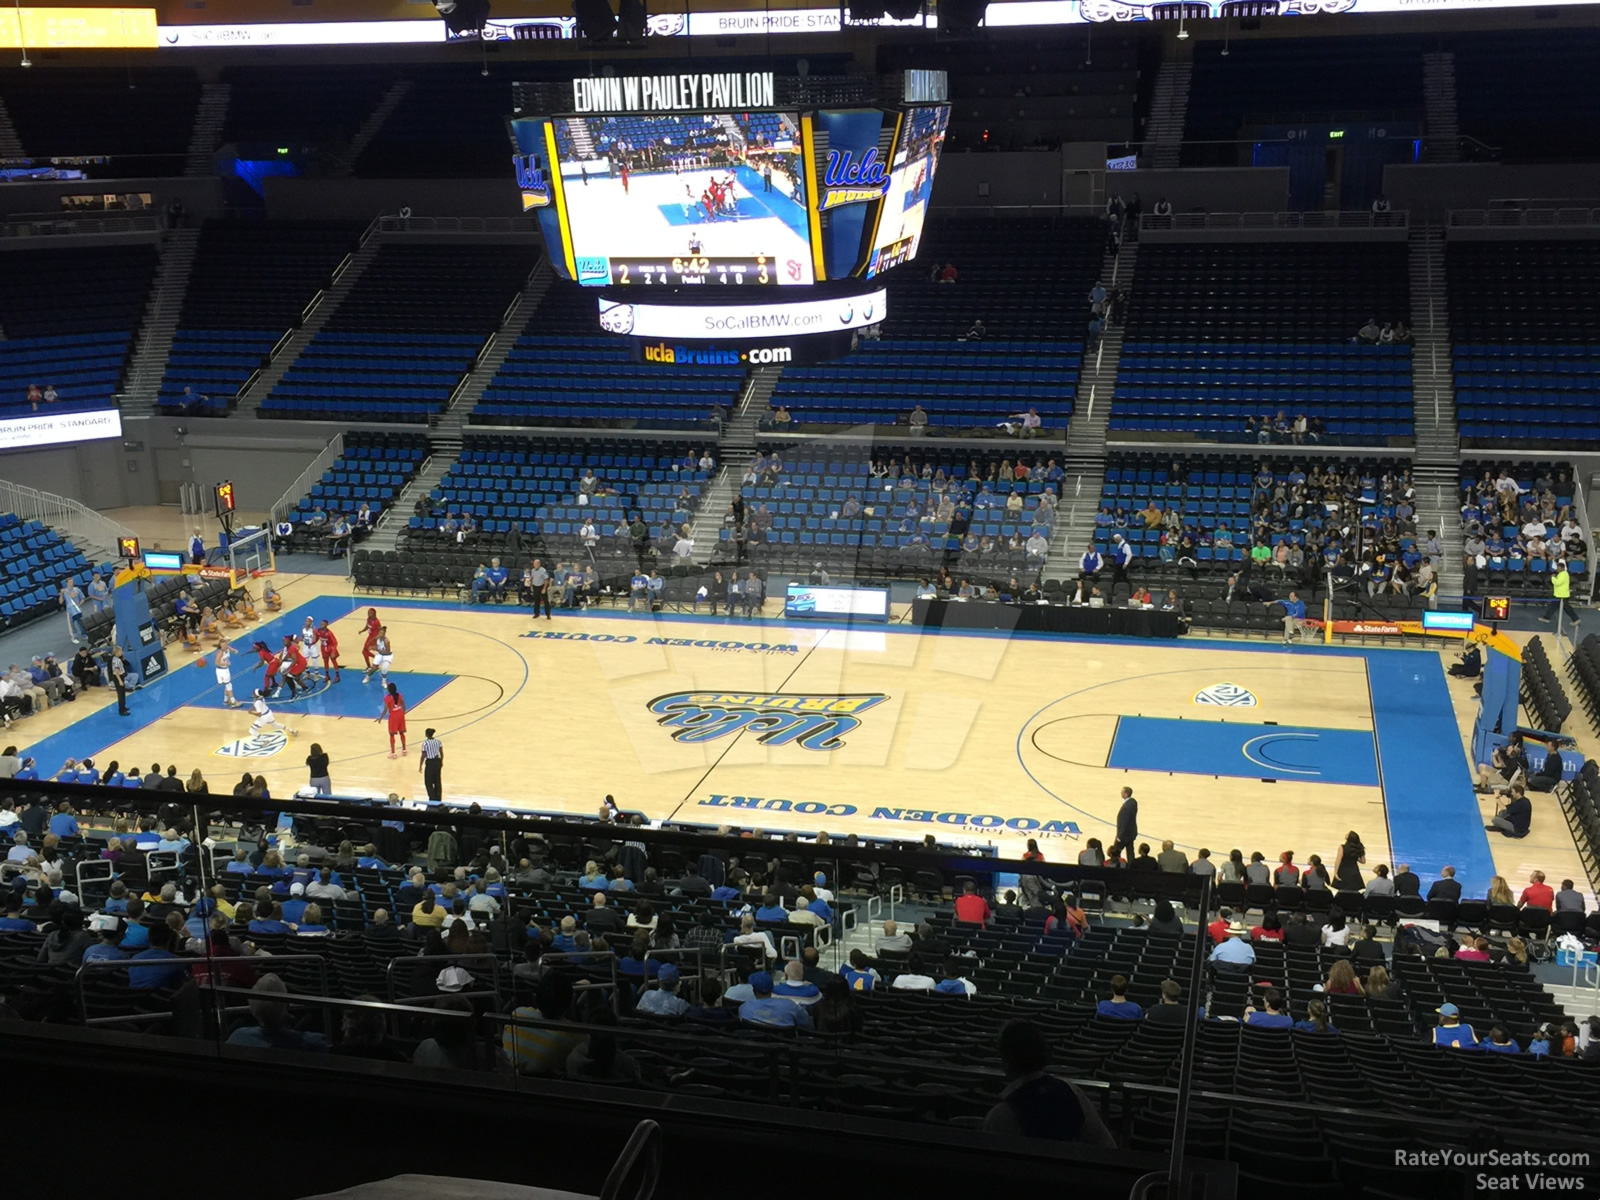 section 226, row 6 seat view  - pauley pavilion